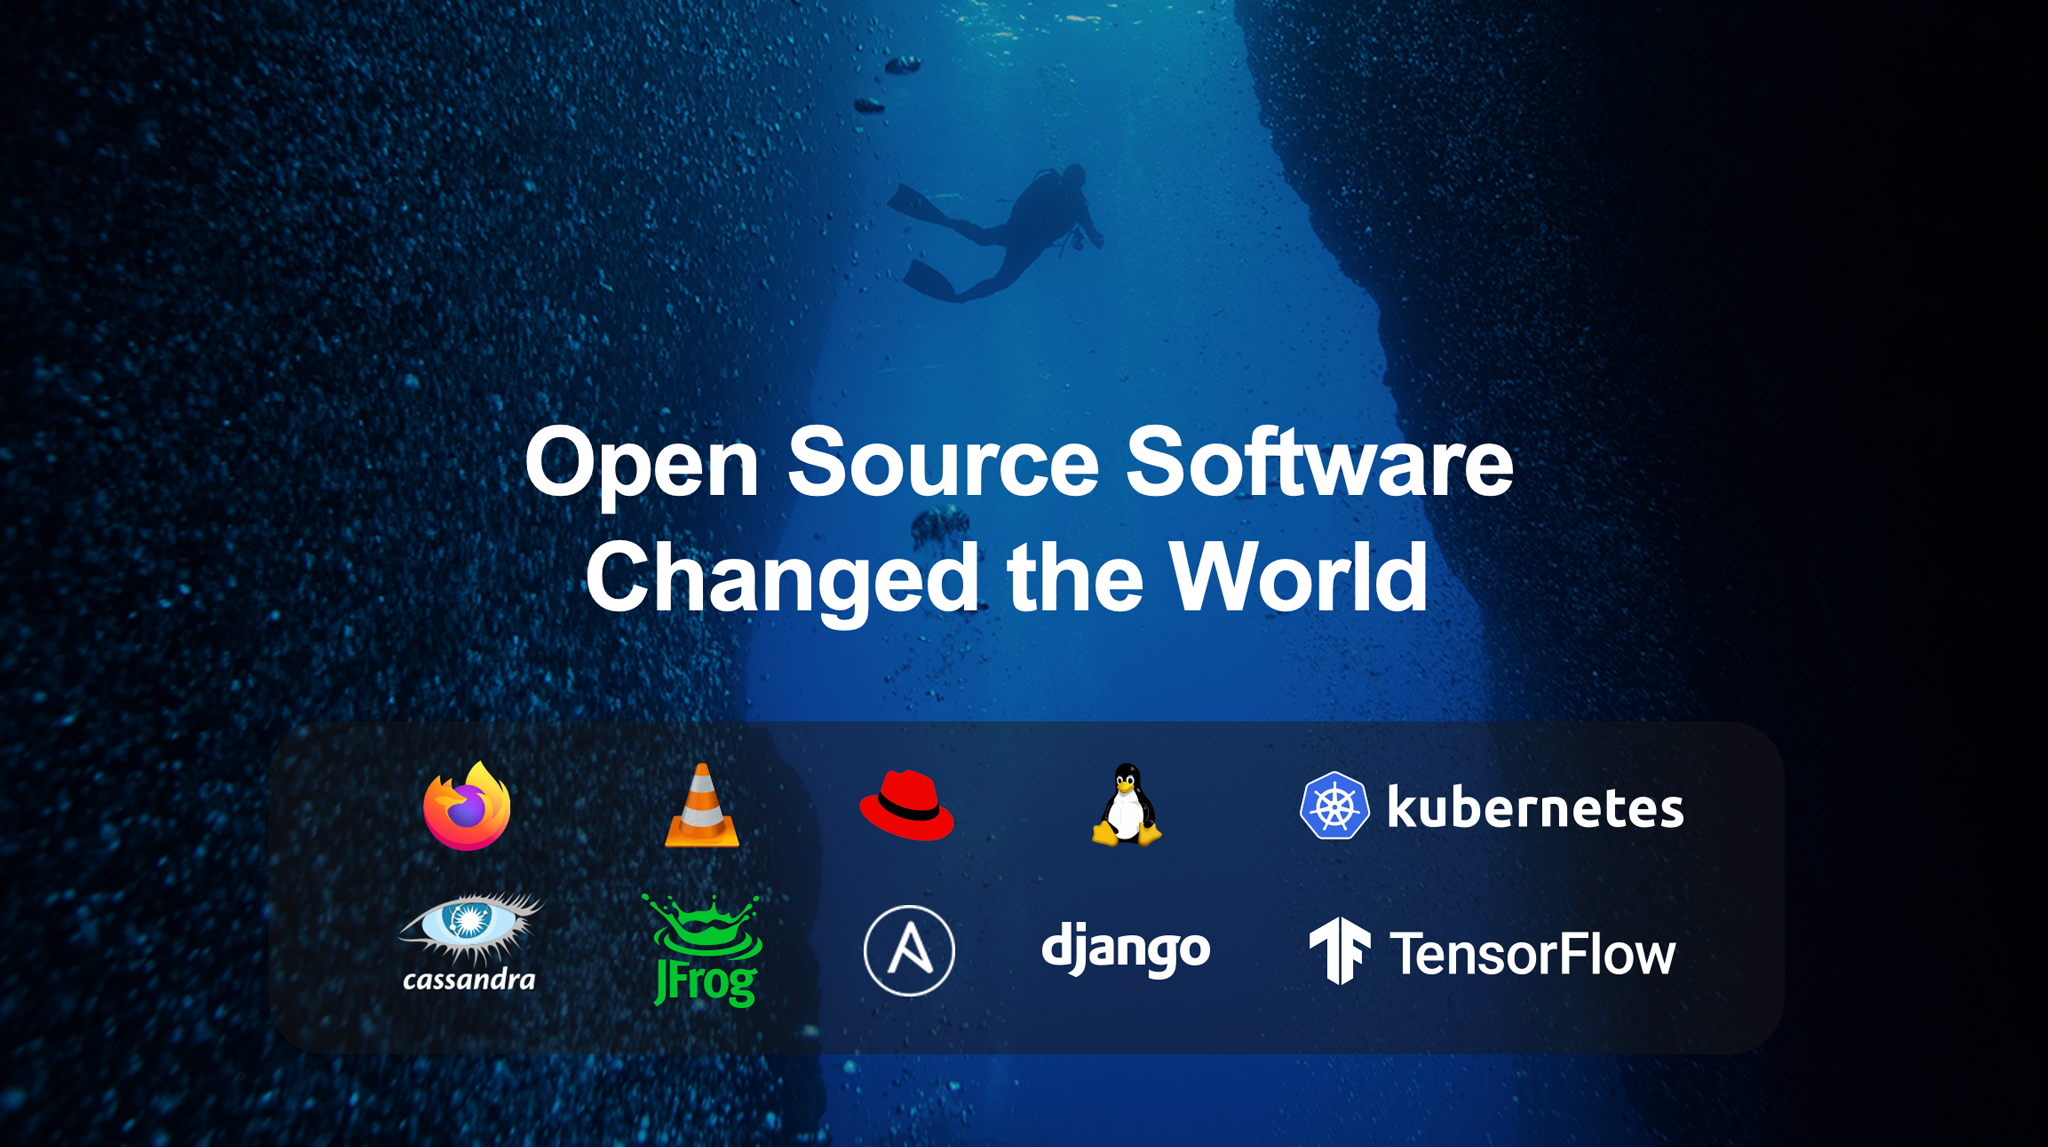 Image reading "Open Source Software Changed the World" with logos of prominent open source projects